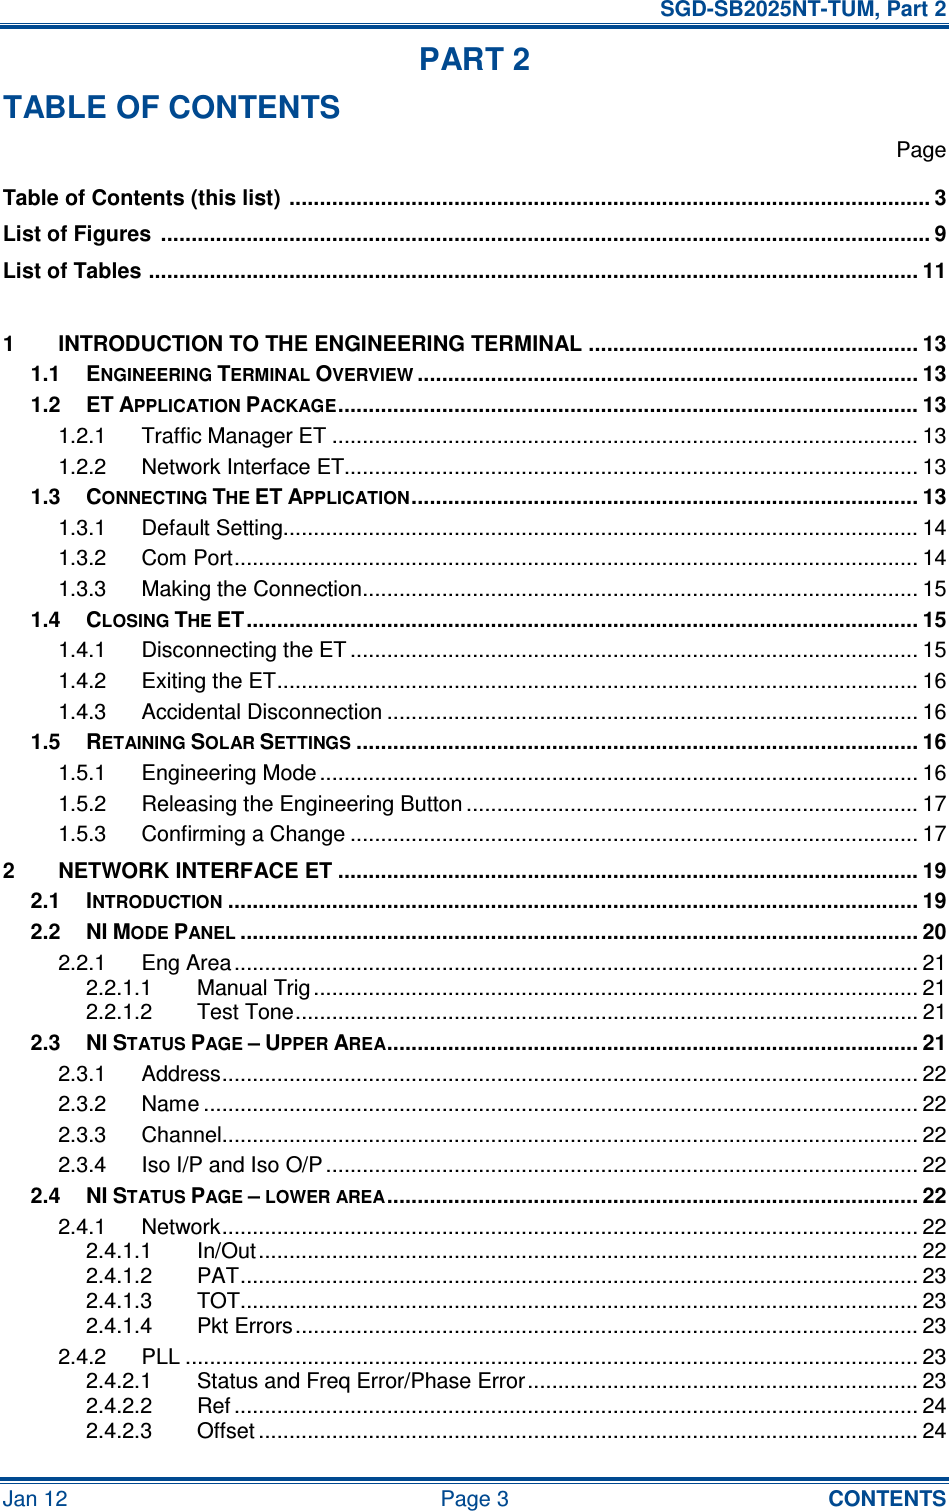   SGD-SB2025NT-TUM, Part 2 Jan 12  Page 3  CONTENTS PART 2 TABLE OF CONTENTS   Page Table of Contents (this list)  ......................................................................................................... 3 List of Figures  .............................................................................................................................. 9 List of Tables .............................................................................................................................. 11  1 INTRODUCTION TO THE ENGINEERING TERMINAL ...................................................... 13 1.1 ENGINEERING TERMINAL OVERVIEW.................................................................................. 13 1.2 ET APPLICATION PACKAGE............................................................................................... 13 1.2.1 Traffic Manager ET ................................................................................................ 13 1.2.2 Network Interface ET.............................................................................................. 13 1.3 CONNECTING THE ET APPLICATION................................................................................... 13 1.3.1 Default Setting........................................................................................................ 14 1.3.2 Com Port................................................................................................................ 14 1.3.3 Making the Connection........................................................................................... 15 1.4 CLOSING THE ET.............................................................................................................. 15 1.4.1 Disconnecting the ET ............................................................................................. 15 1.4.2 Exiting the ET......................................................................................................... 16 1.4.3 Accidental Disconnection ....................................................................................... 16 1.5 RETAINING SOLAR SETTINGS............................................................................................ 16 1.5.1 Engineering Mode .................................................................................................. 16 1.5.2 Releasing the Engineering Button .......................................................................... 17 1.5.3 Confirming a Change ............................................................................................. 17 2 NETWORK INTERFACE ET ............................................................................................... 19 2.1 INTRODUCTION................................................................................................................. 19 2.2 NI MODE PANEL............................................................................................................... 20 2.2.1 Eng Area................................................................................................................ 21 2.2.1.1 Manual Trig................................................................................................... 21 2.2.1.2 Test Tone...................................................................................................... 21 2.3 NI STATUS PAGE – UPPER AREA....................................................................................... 21 2.3.1 Address.................................................................................................................. 22 2.3.2 Name ..................................................................................................................... 22 2.3.3 Channel.................................................................................................................. 22 2.3.4 Iso I/P and Iso O/P ................................................................................................. 22 2.4 NI STATUS PAGE – LOWER AREA....................................................................................... 22 2.4.1 Network.................................................................................................................. 22 2.4.1.1 In/Out............................................................................................................ 22 2.4.1.2 PAT............................................................................................................... 23 2.4.1.3 TOT............................................................................................................... 23 2.4.1.4 Pkt Errors...................................................................................................... 23 2.4.2 PLL ........................................................................................................................ 23 2.4.2.1 Status and Freq Error/Phase Error................................................................ 23 2.4.2.2 Ref ................................................................................................................ 24 2.4.2.3 Offset ............................................................................................................ 24 